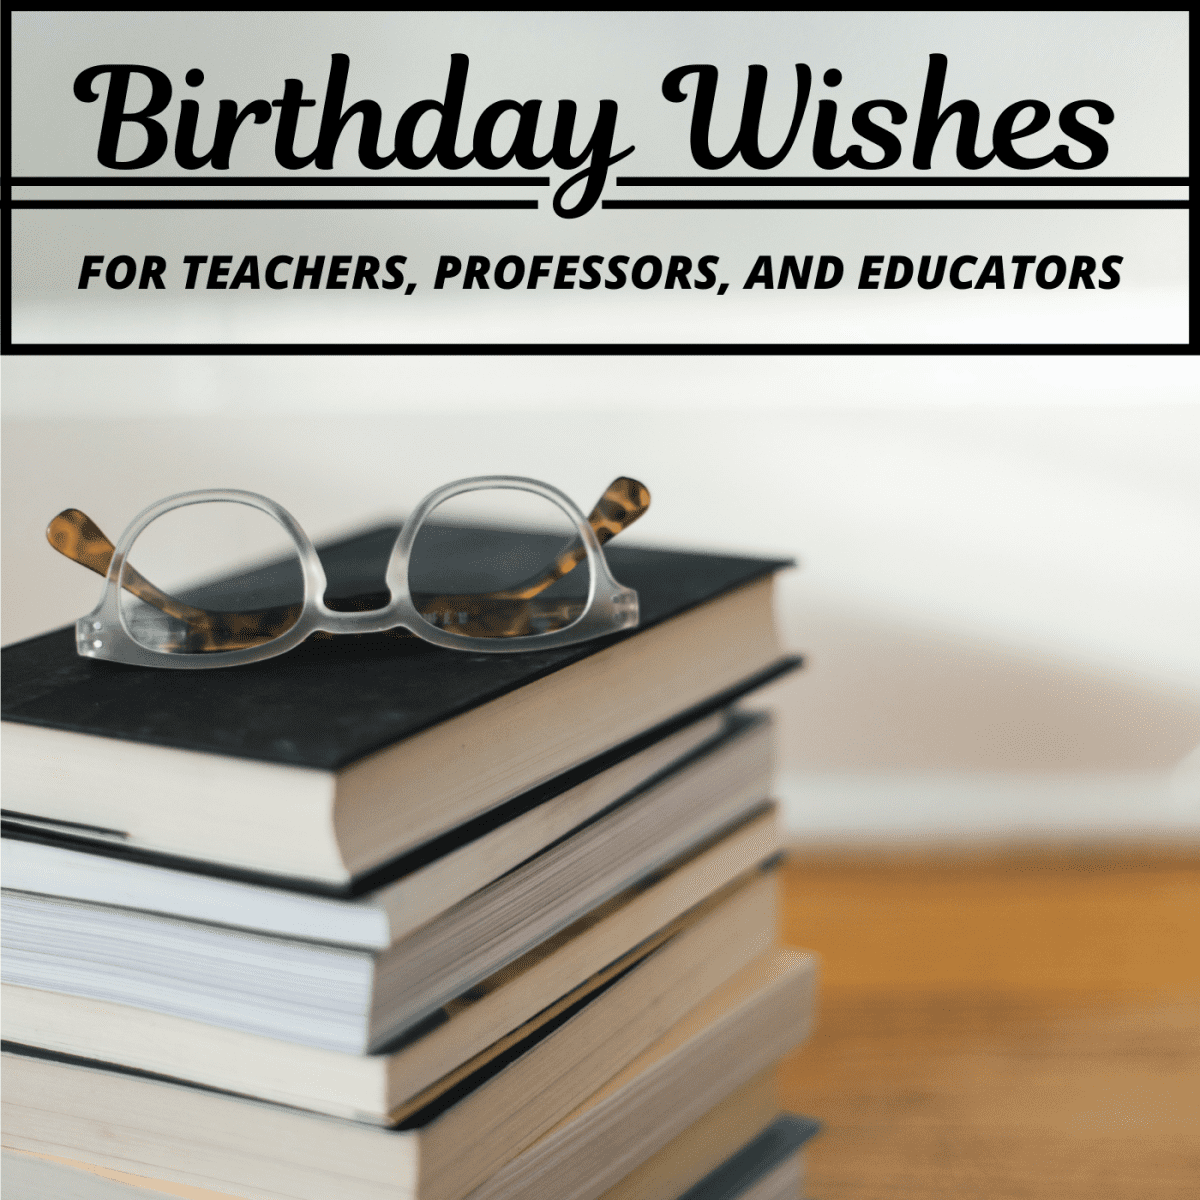 Example Birthday Messages for Teachers or Educators - Holidappy